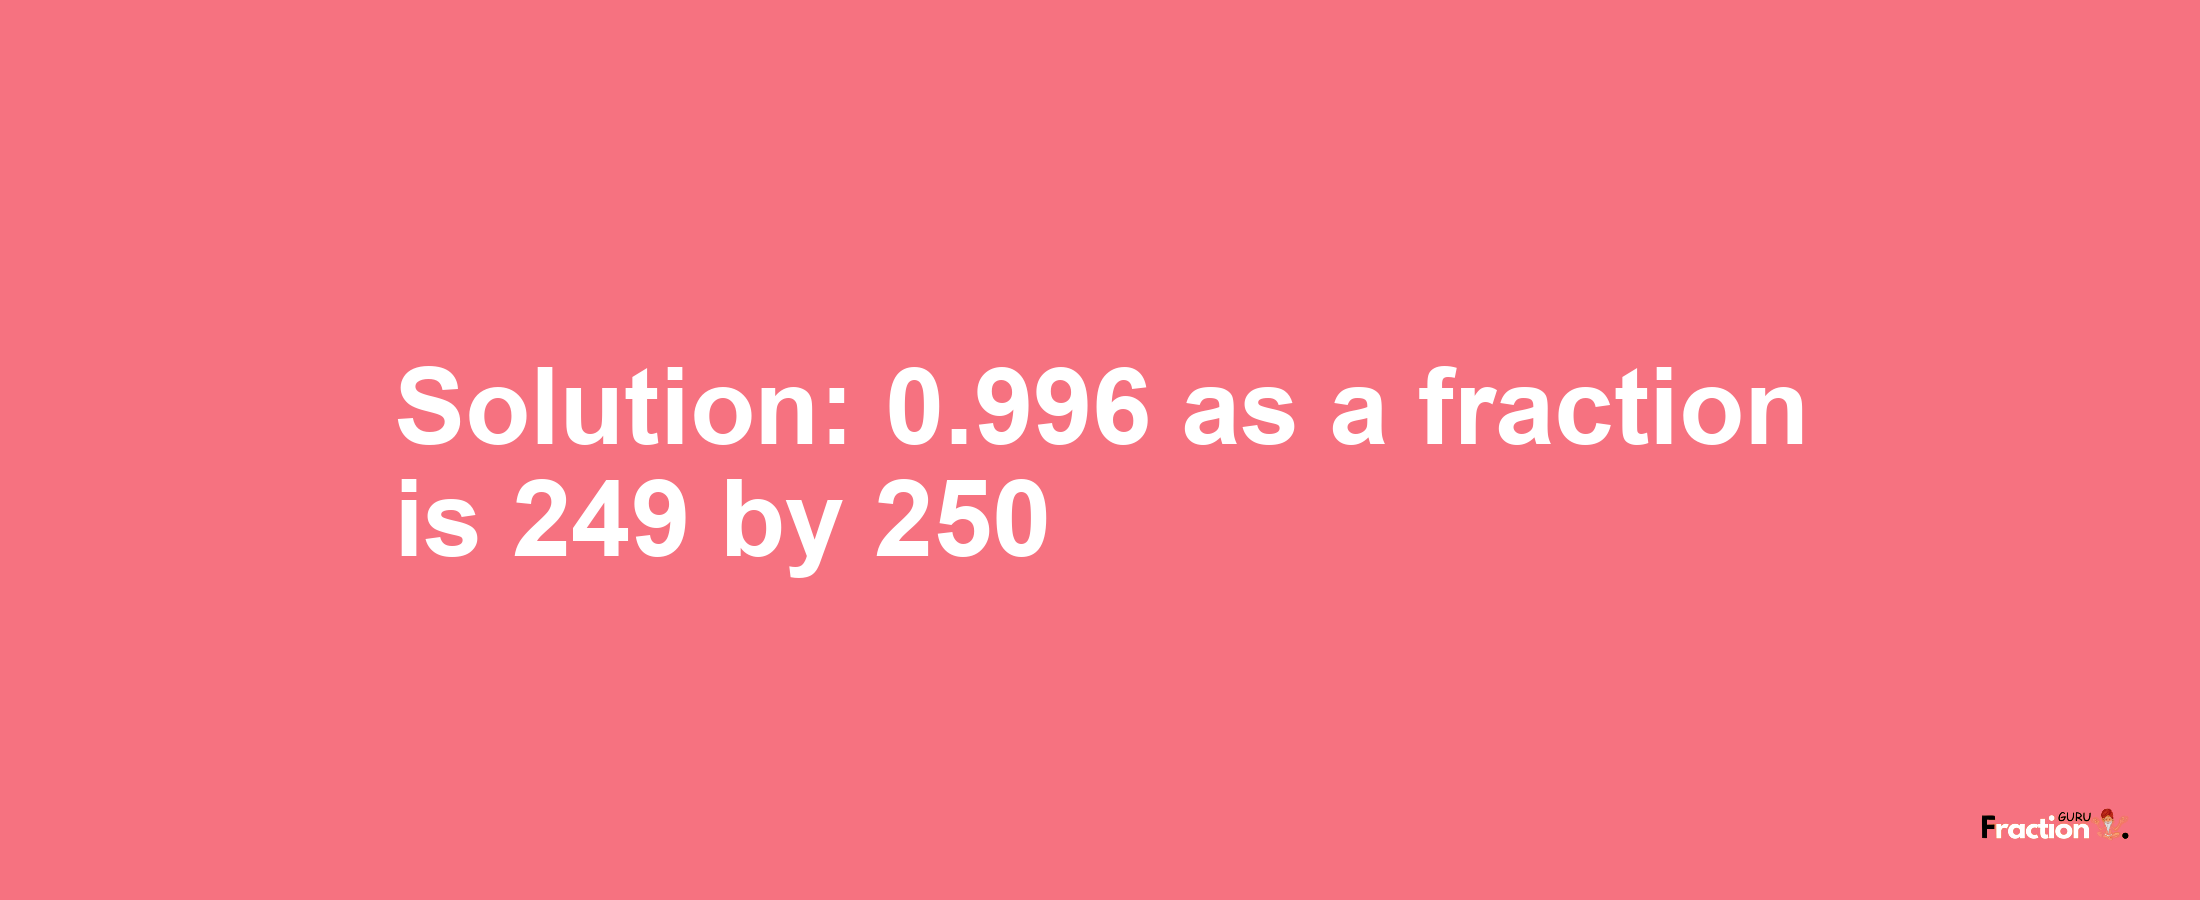 Solution:0.996 as a fraction is 249/250